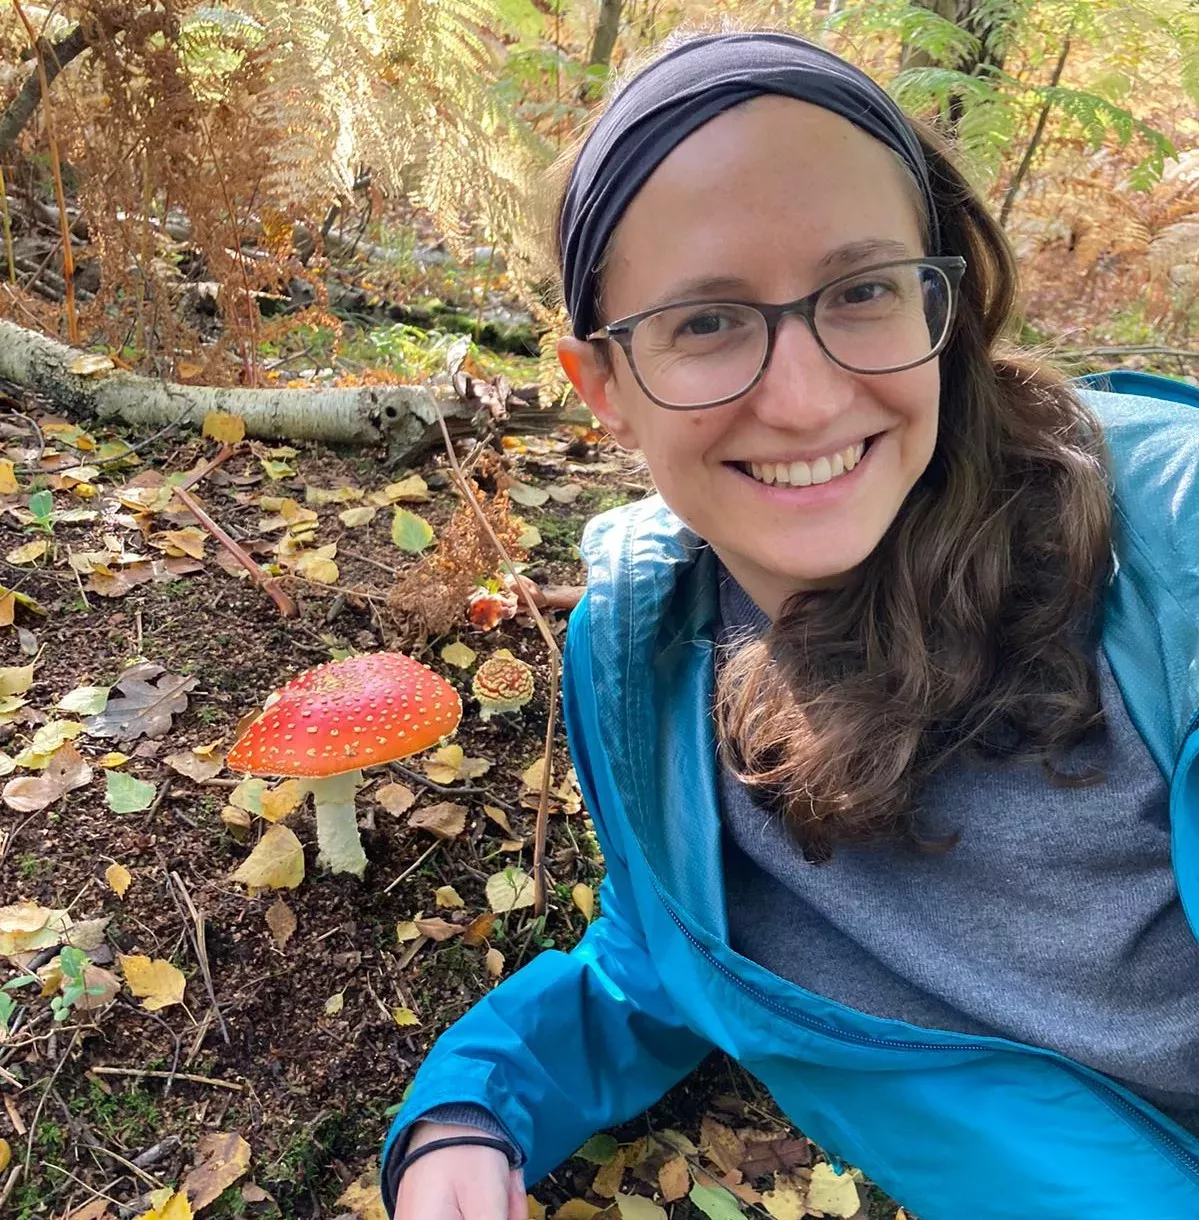 Rowena hill poses with a red mushroom coated in small white speckles